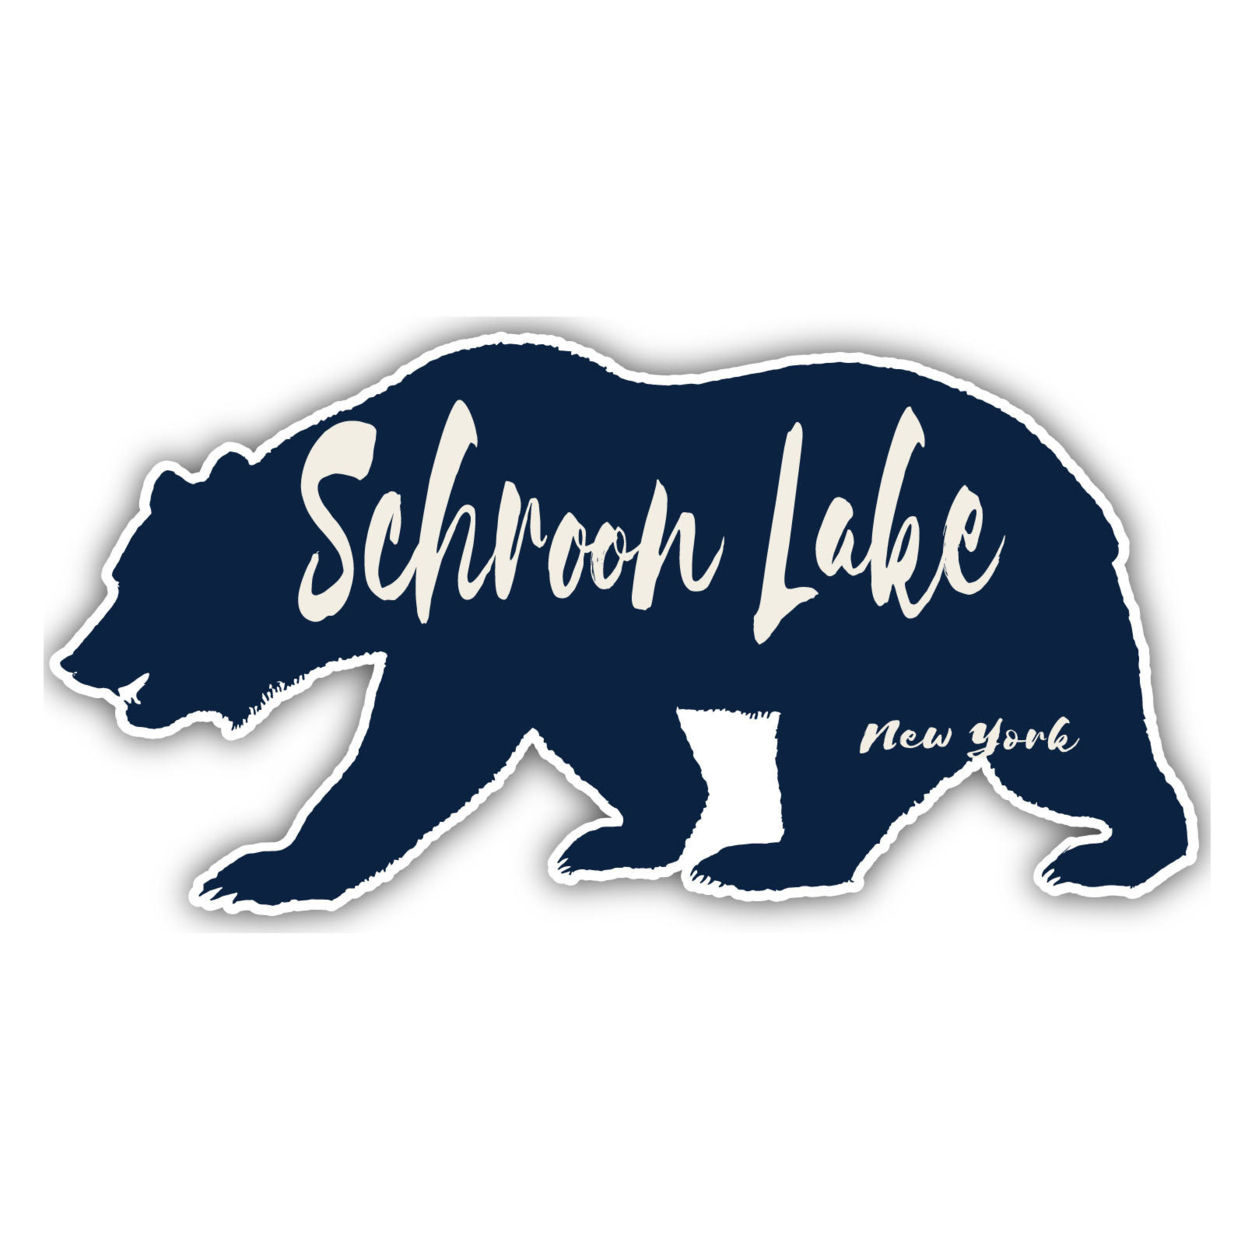 Schroon Lake New York Souvenir Decorative Stickers (Choose Theme And Size) - Single Unit, 2-Inch, Tent